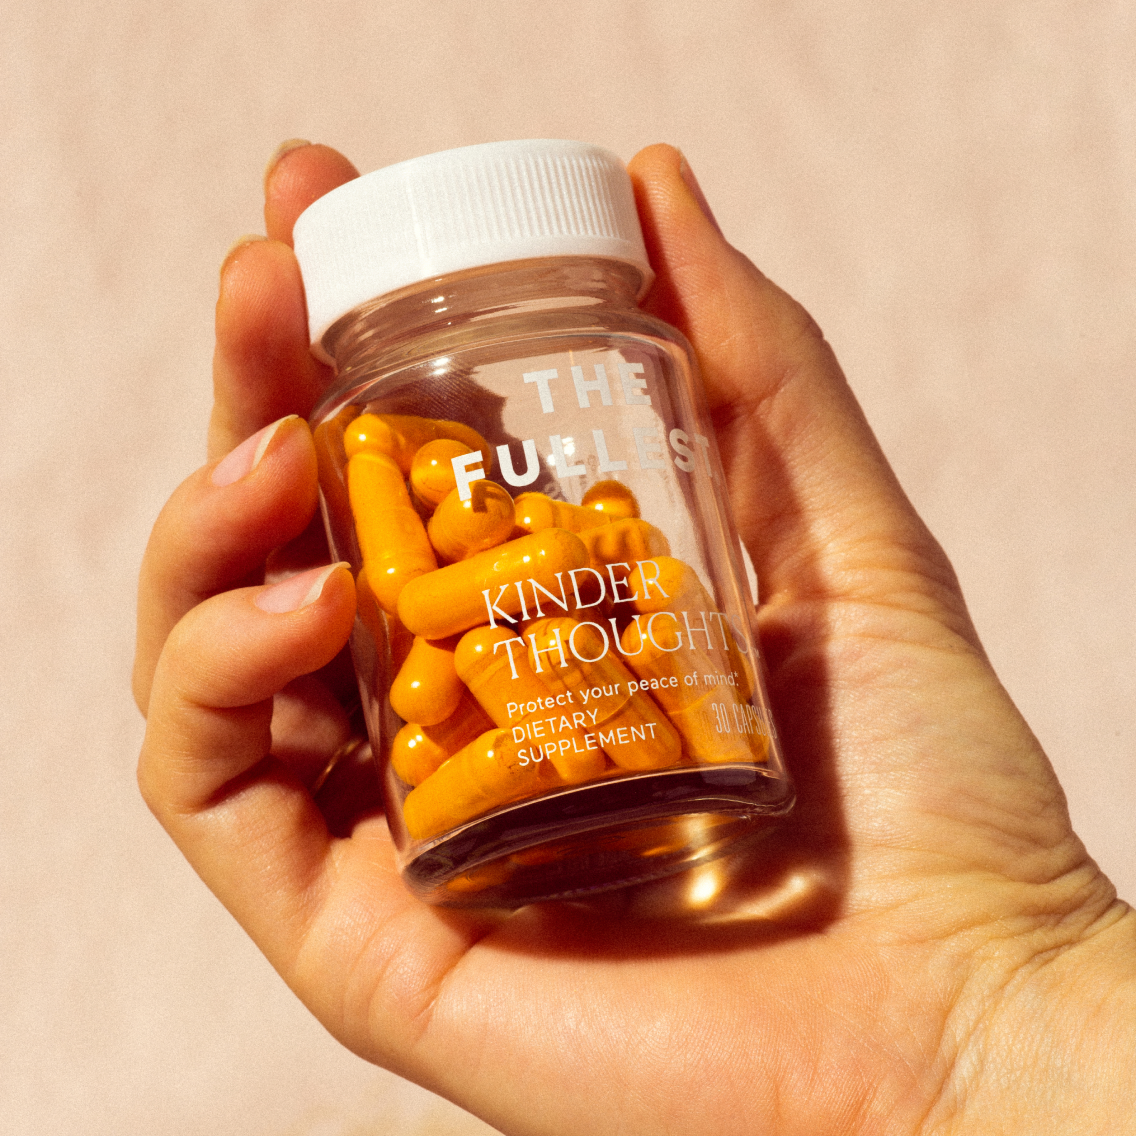 Transparent supplement bottle labeled "THE FULLEST Kinder Thoughts" containing orange curcumin capsules, isolated on a white background.